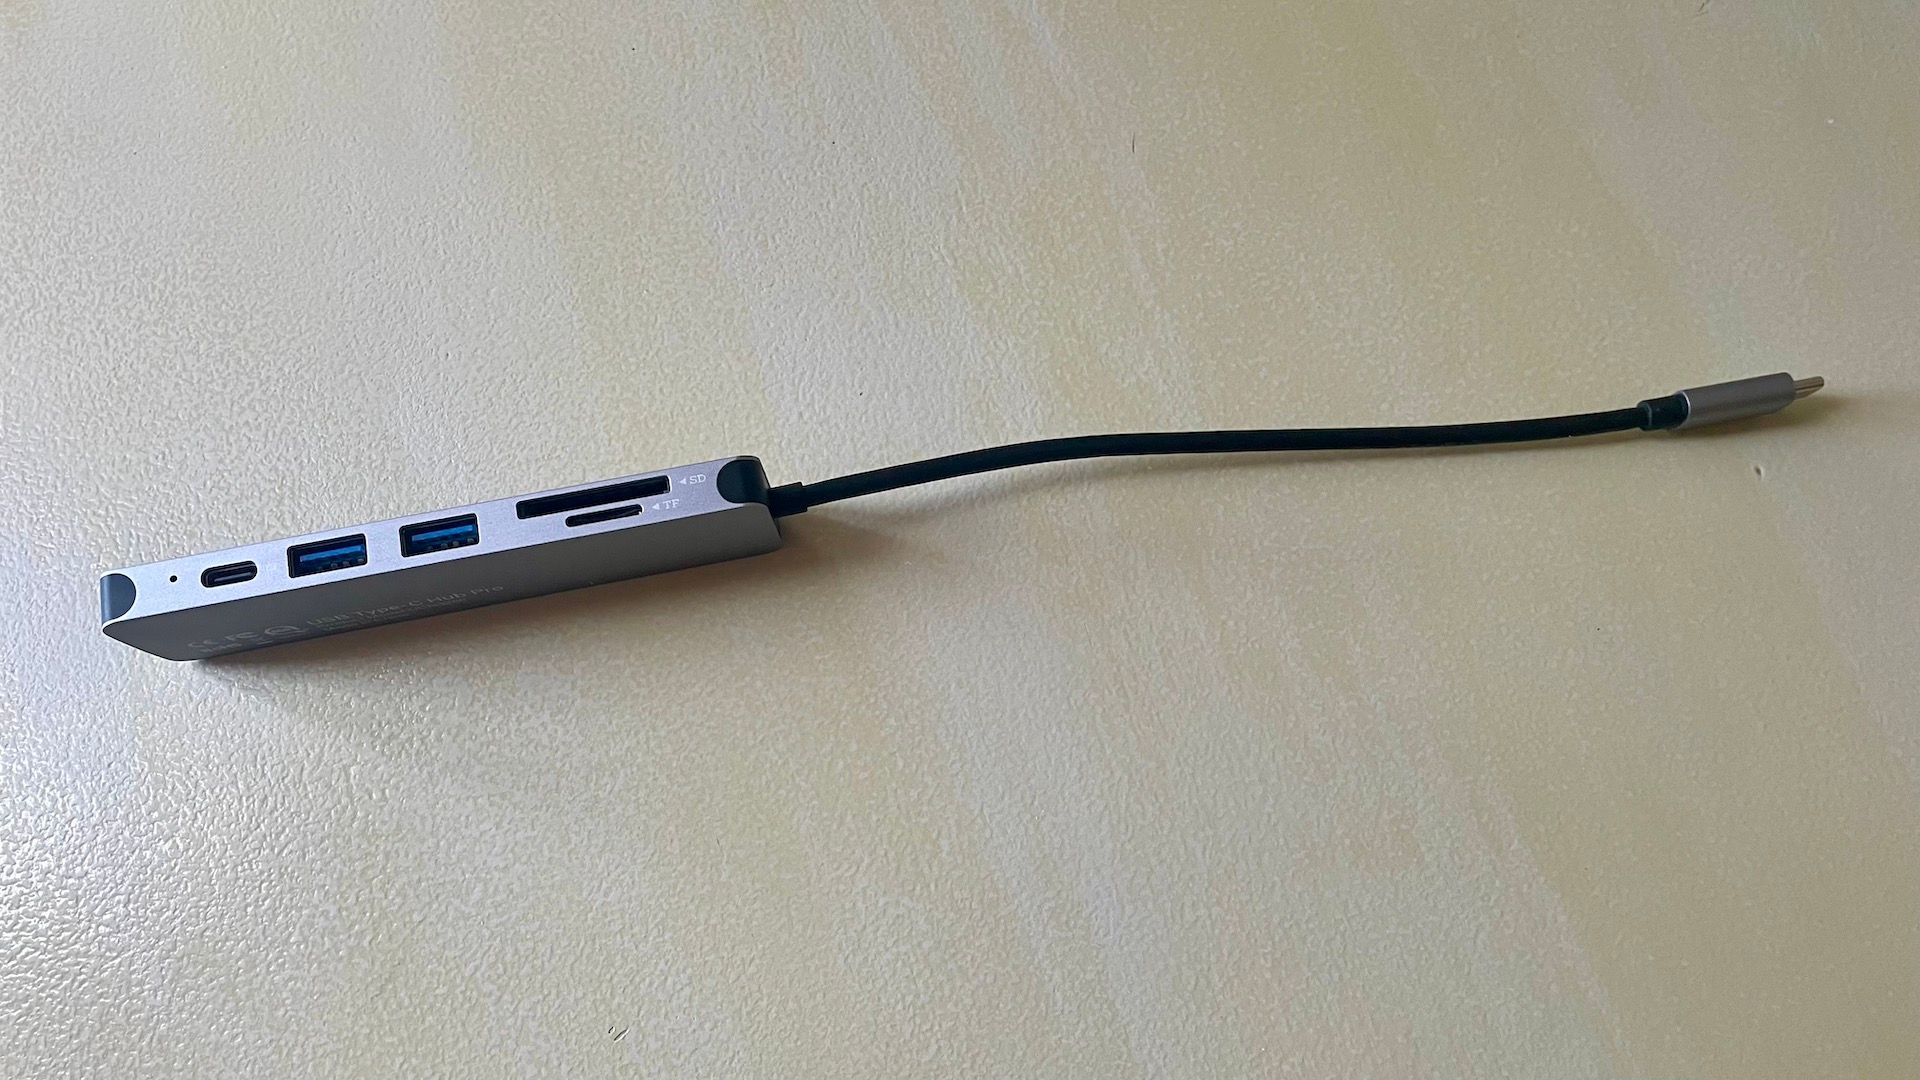 A side view of the Hiearcool USB-C adapter.